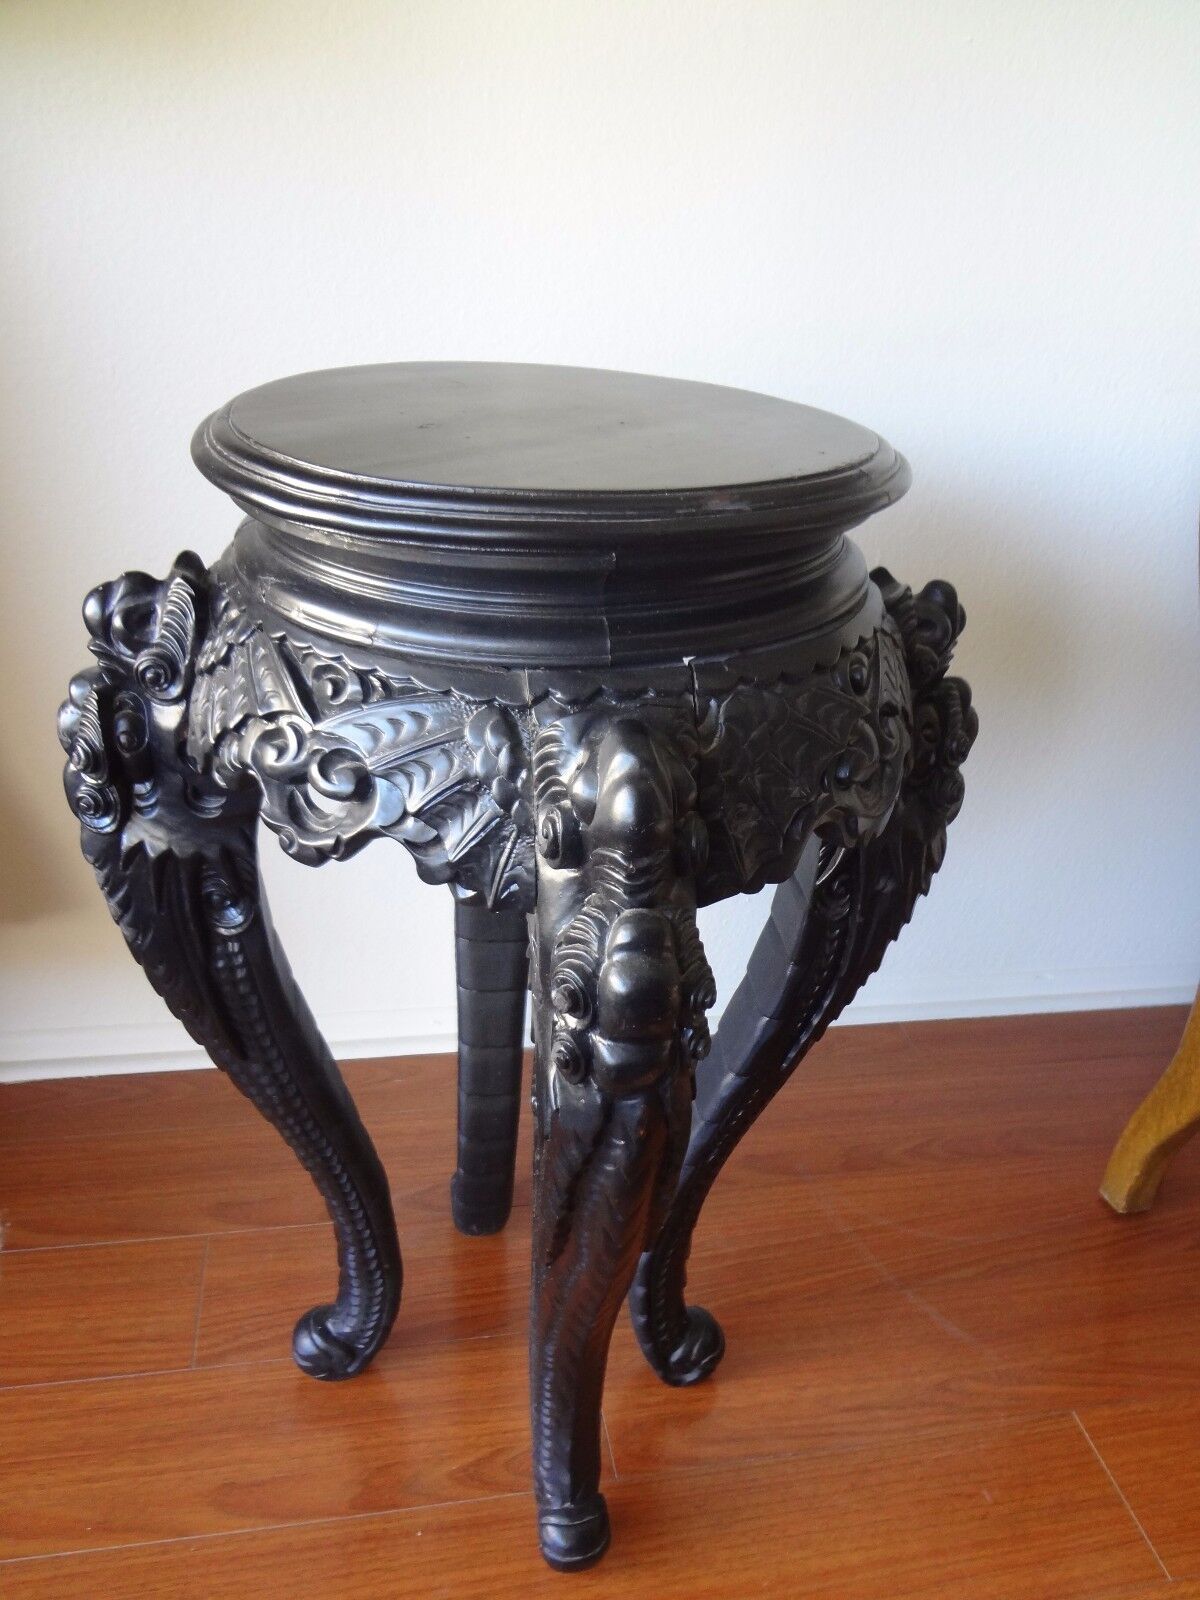 CHINESE ANTIQUE TABLE/STAND EARLY 1900 Без бренда